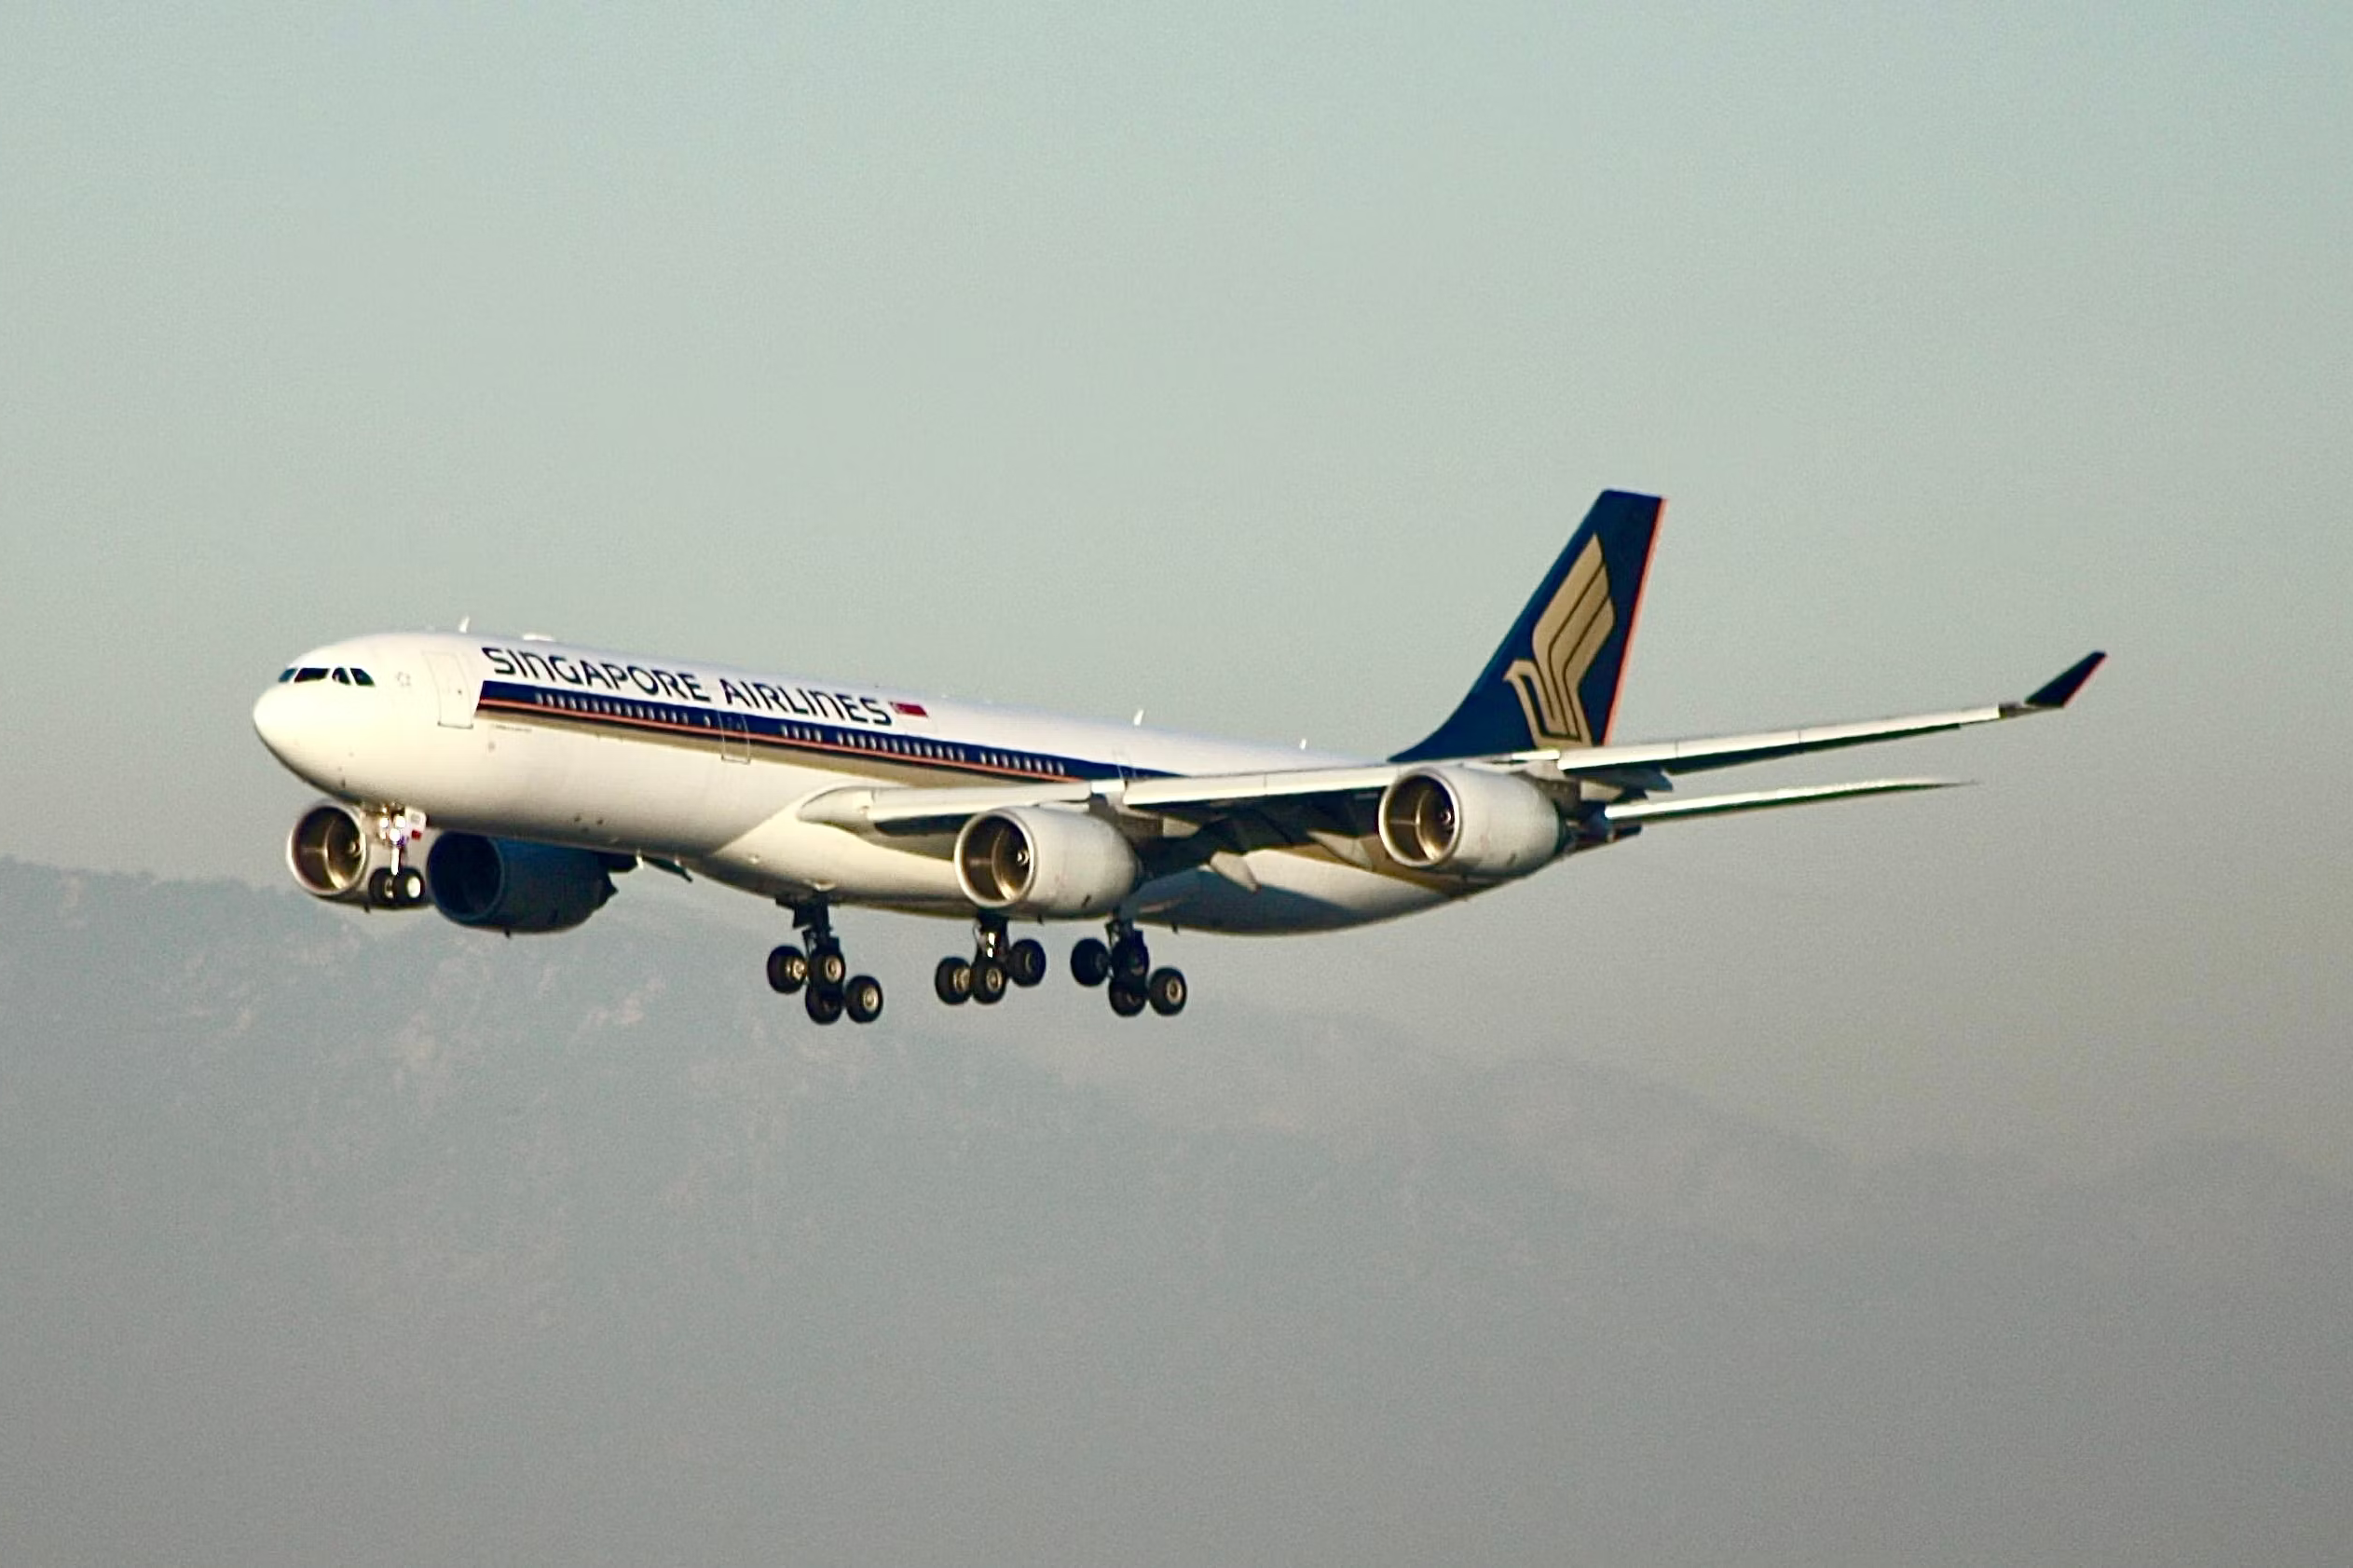 A Singapore Airlines A340-300 on approach